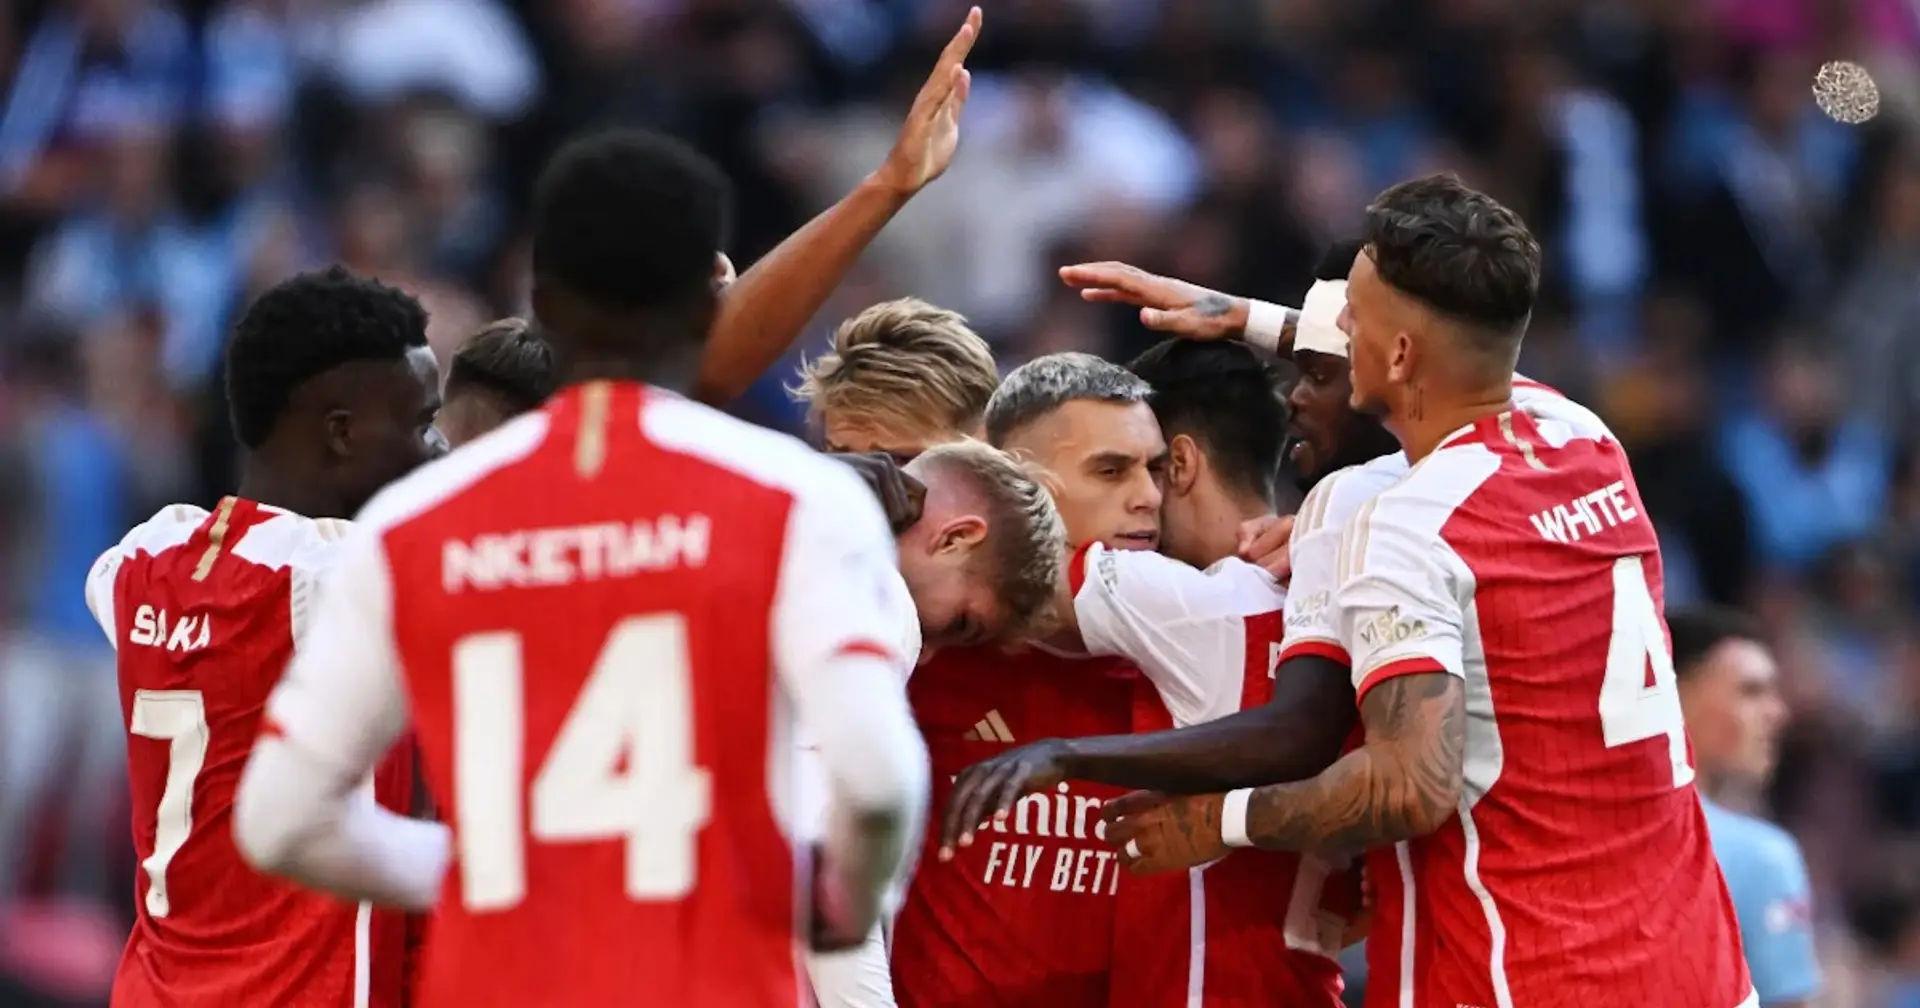 Who should start Arsenal's Premier League opener v Forest? Why? 